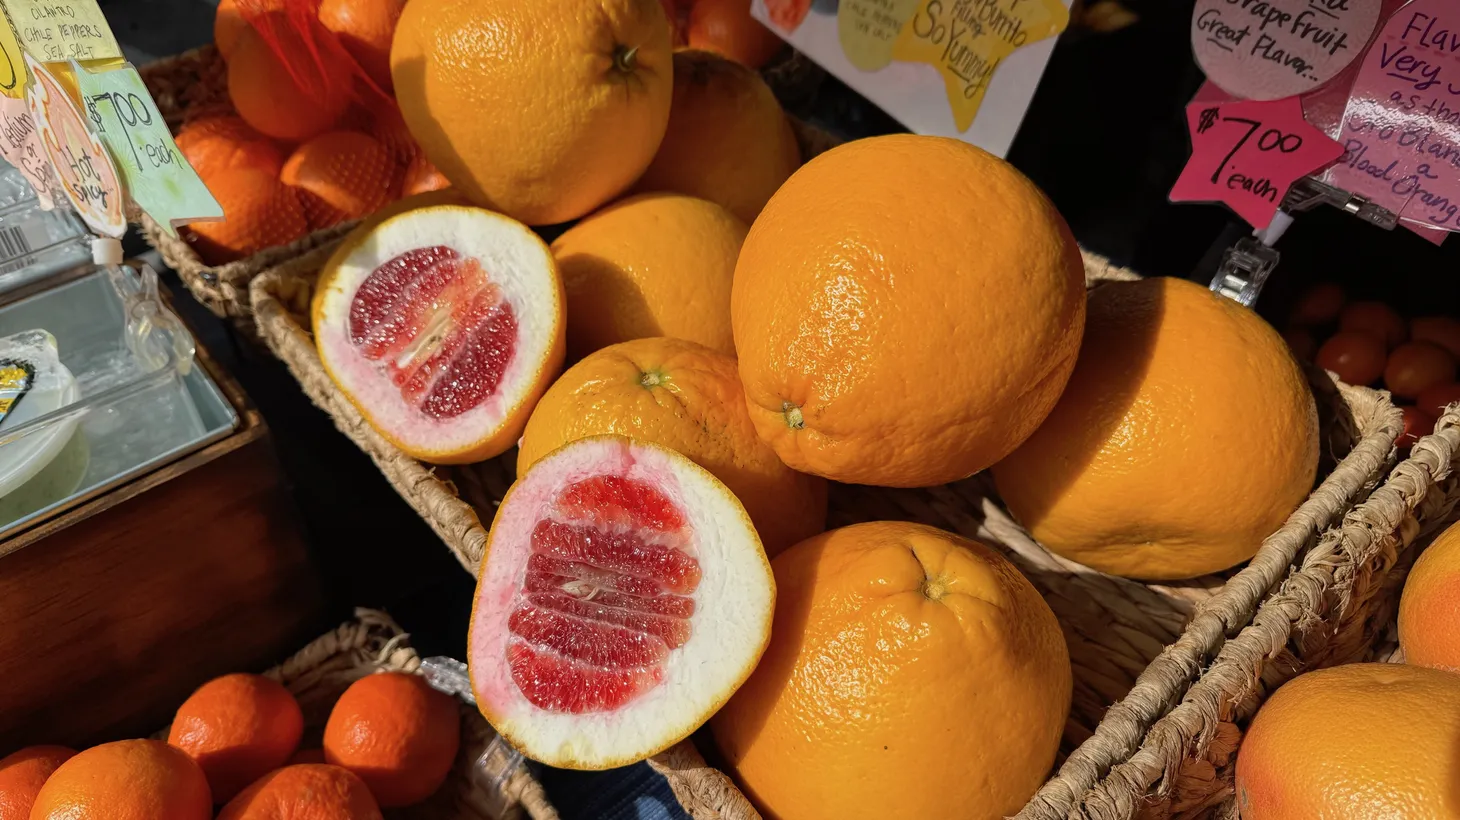 Only picking ripe fruit, like these Valentine pomelos, is the key to great citrus, says Laura Ramirez of JJ's Lone Daughter Ranch.